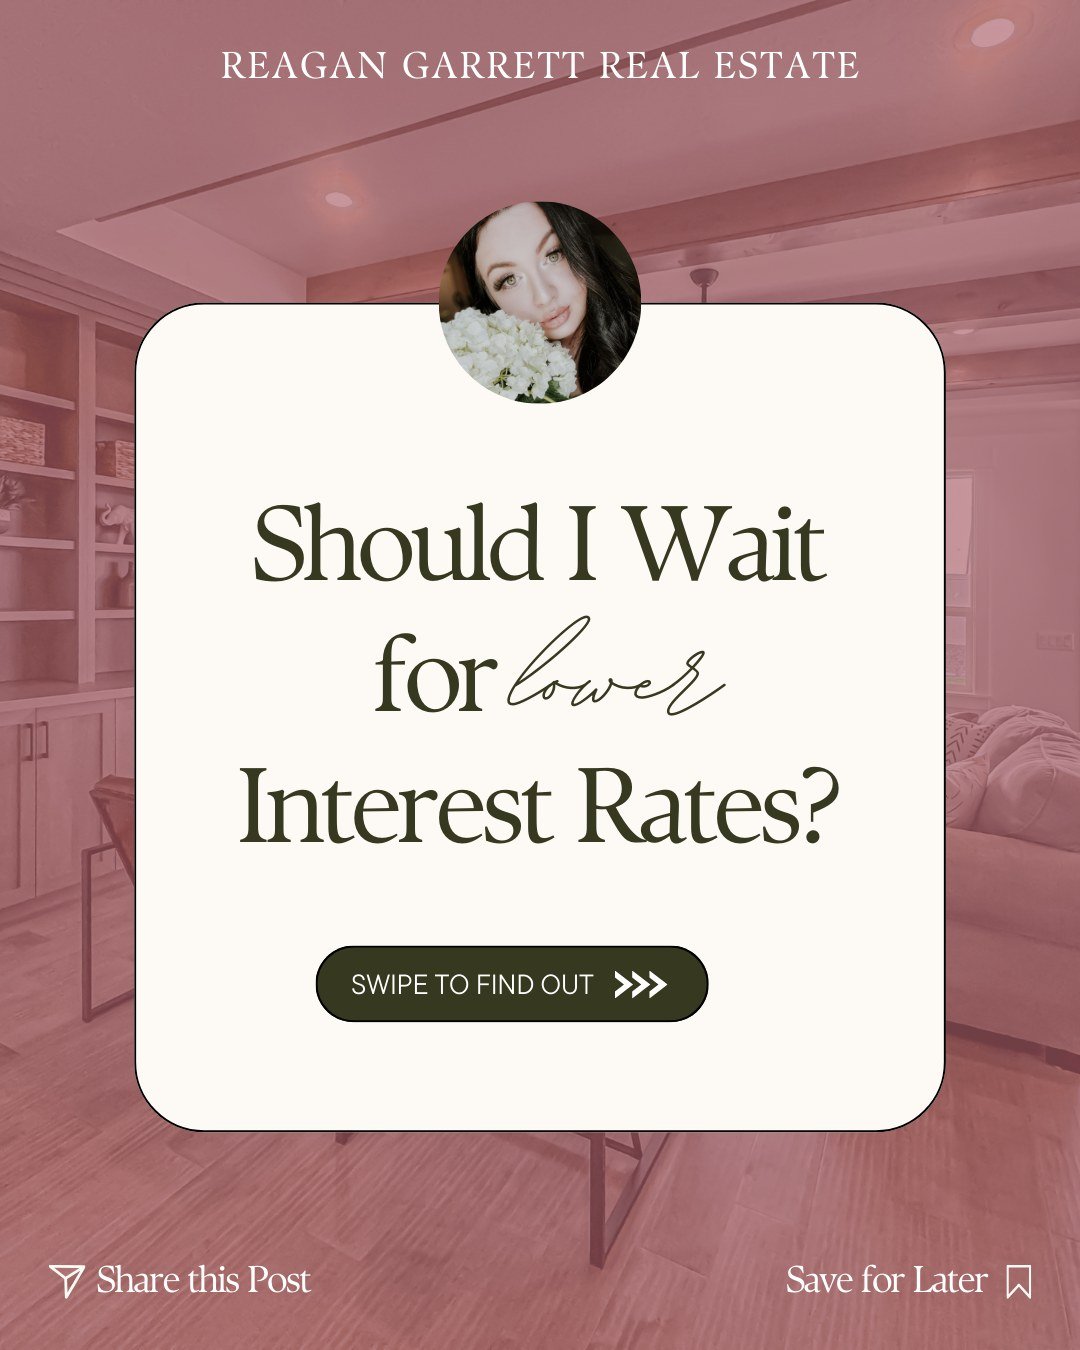 Instead of waiting for rates to ✨maybe ✨ go down, while home prices in the Treasure Valley increase ever so slightly, here's what you can do instead to get a more desirable rate. ⬇️

And as always. call or text me if you...

✦ are ready to buy.
✦ wan